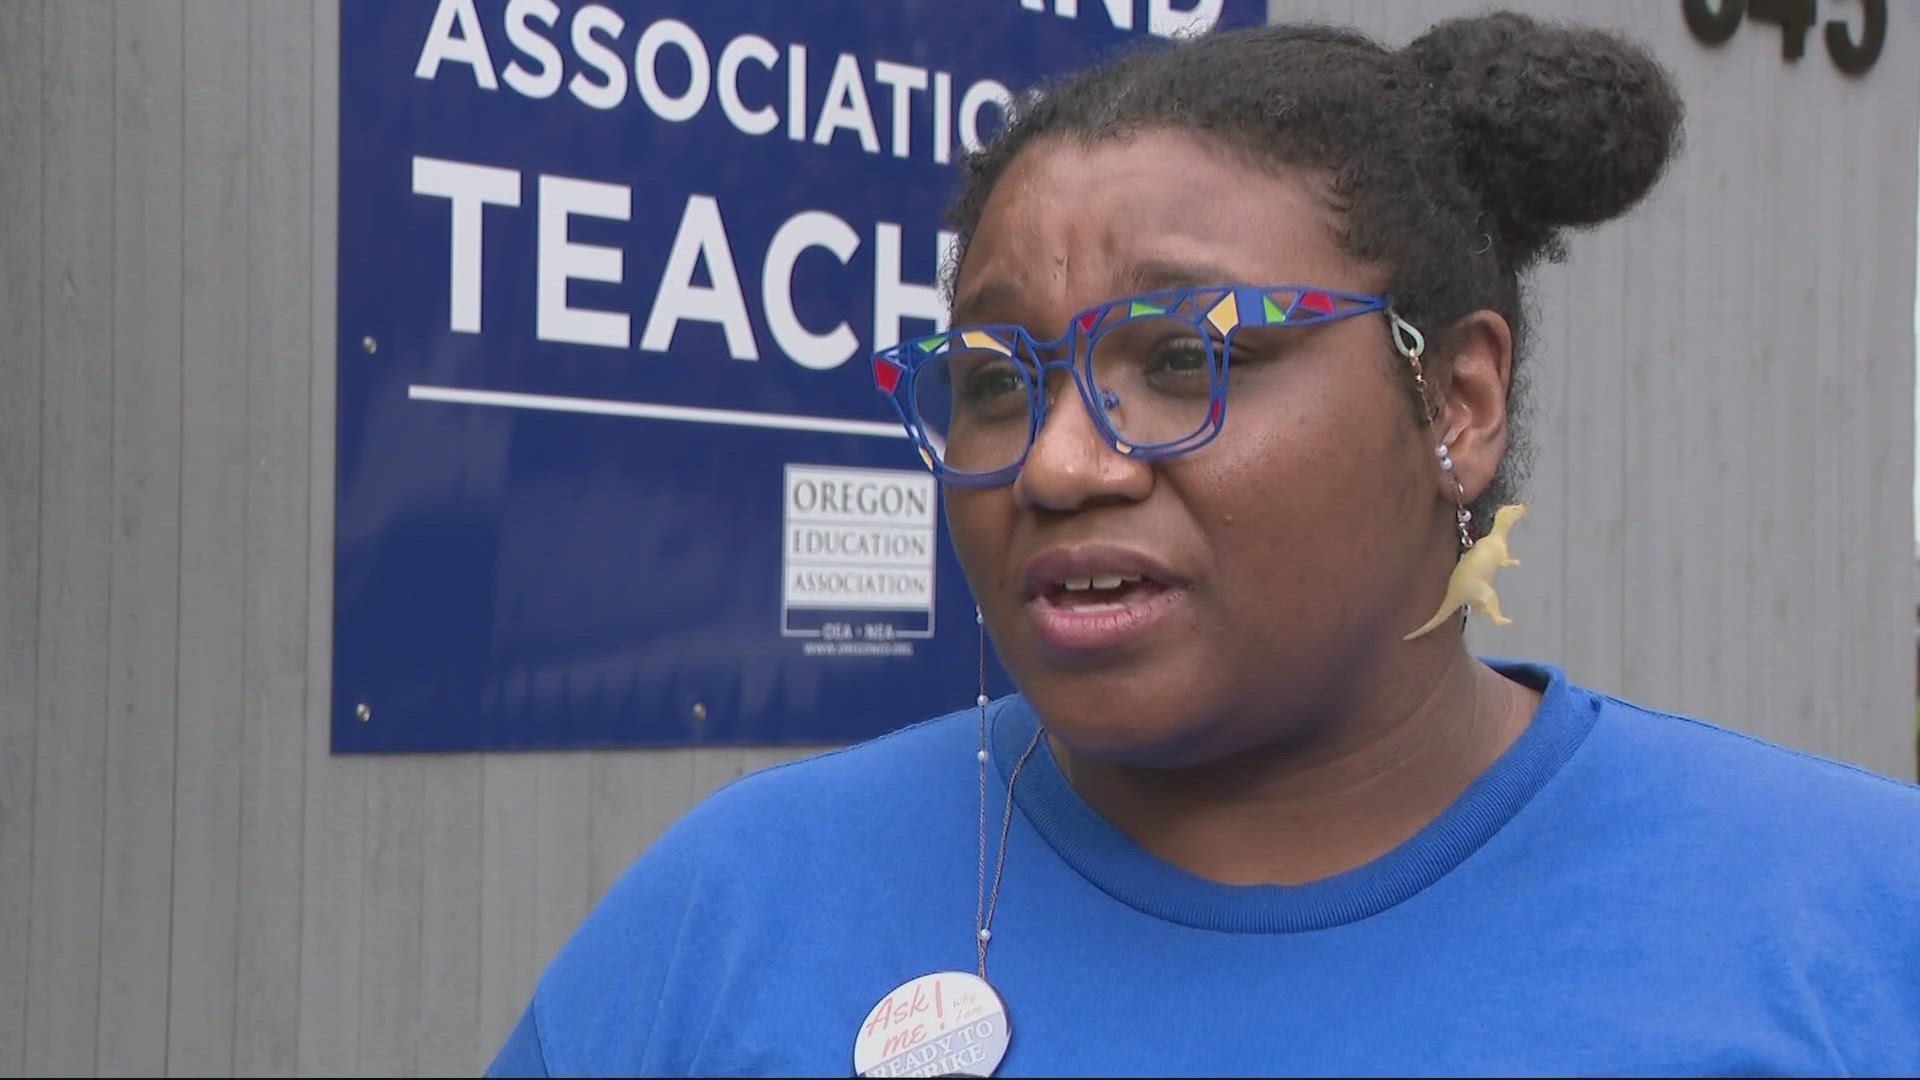 With a potential strike date looming Nov. 1, both the district and teachers union say they hope to come to a deal. Mediation won’t happen for at least a week.